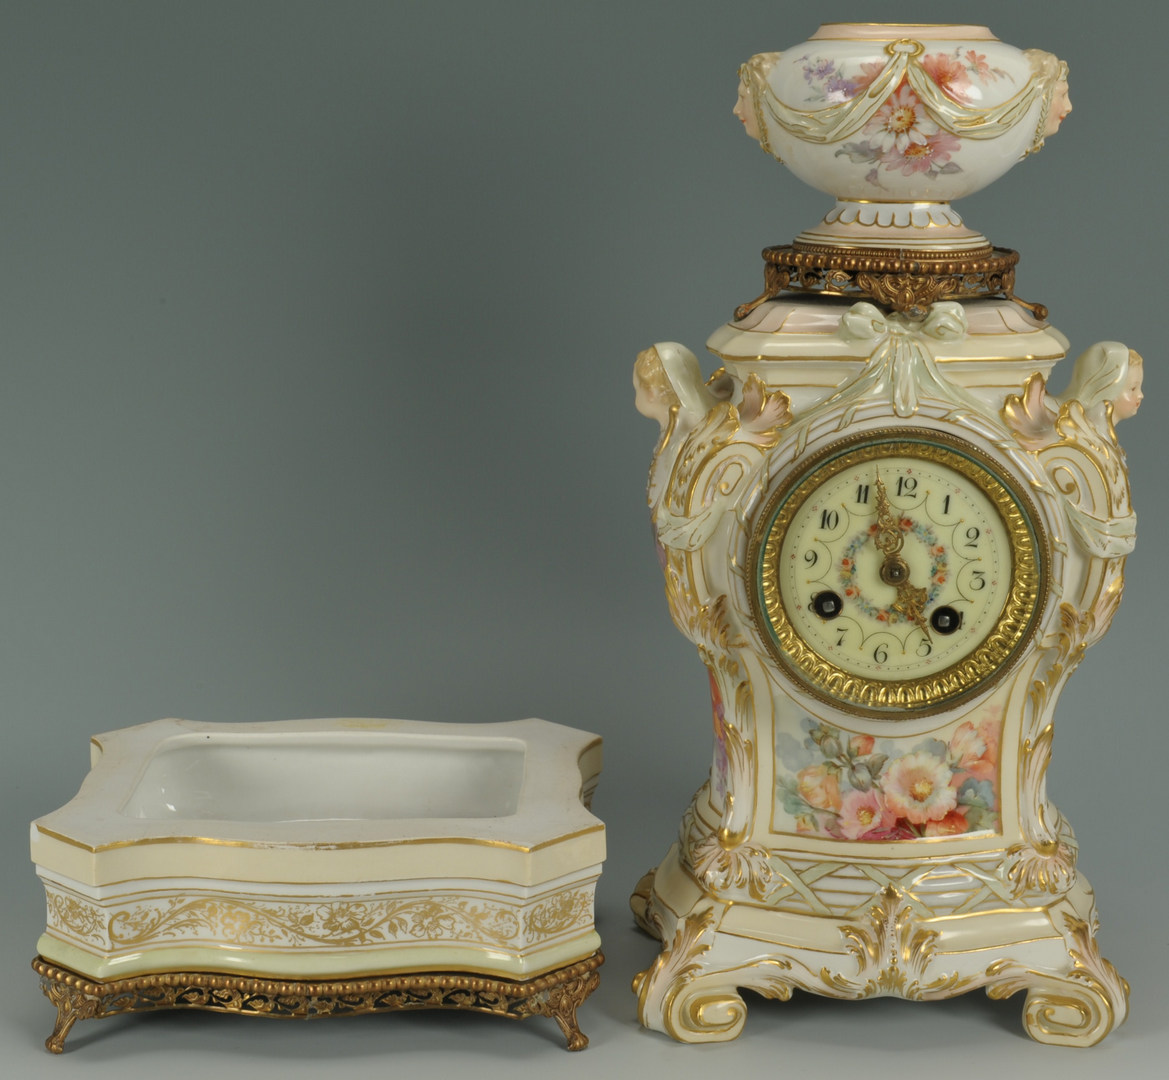 Lot 246: Porcelain KPM clock with stand, mid-19th c.